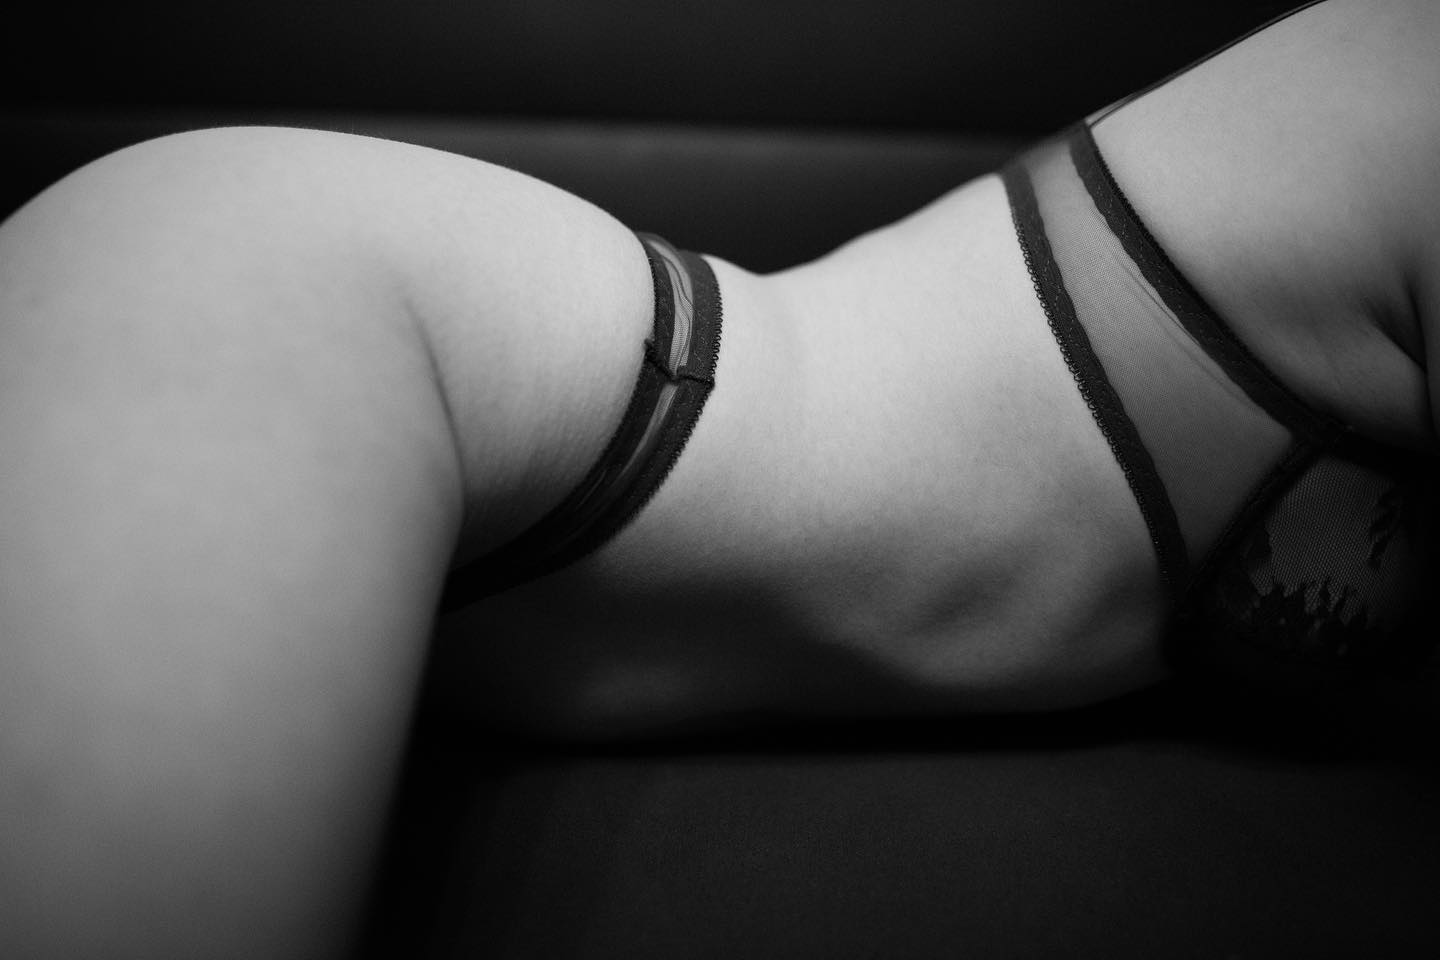 Link to my free OF in bio 🖤

#onlyfansgirls #onlyfansmodel #onlyfanz #fypシ #beauty #natural #fakebody #photography #blackandwhitephotography #bootylover